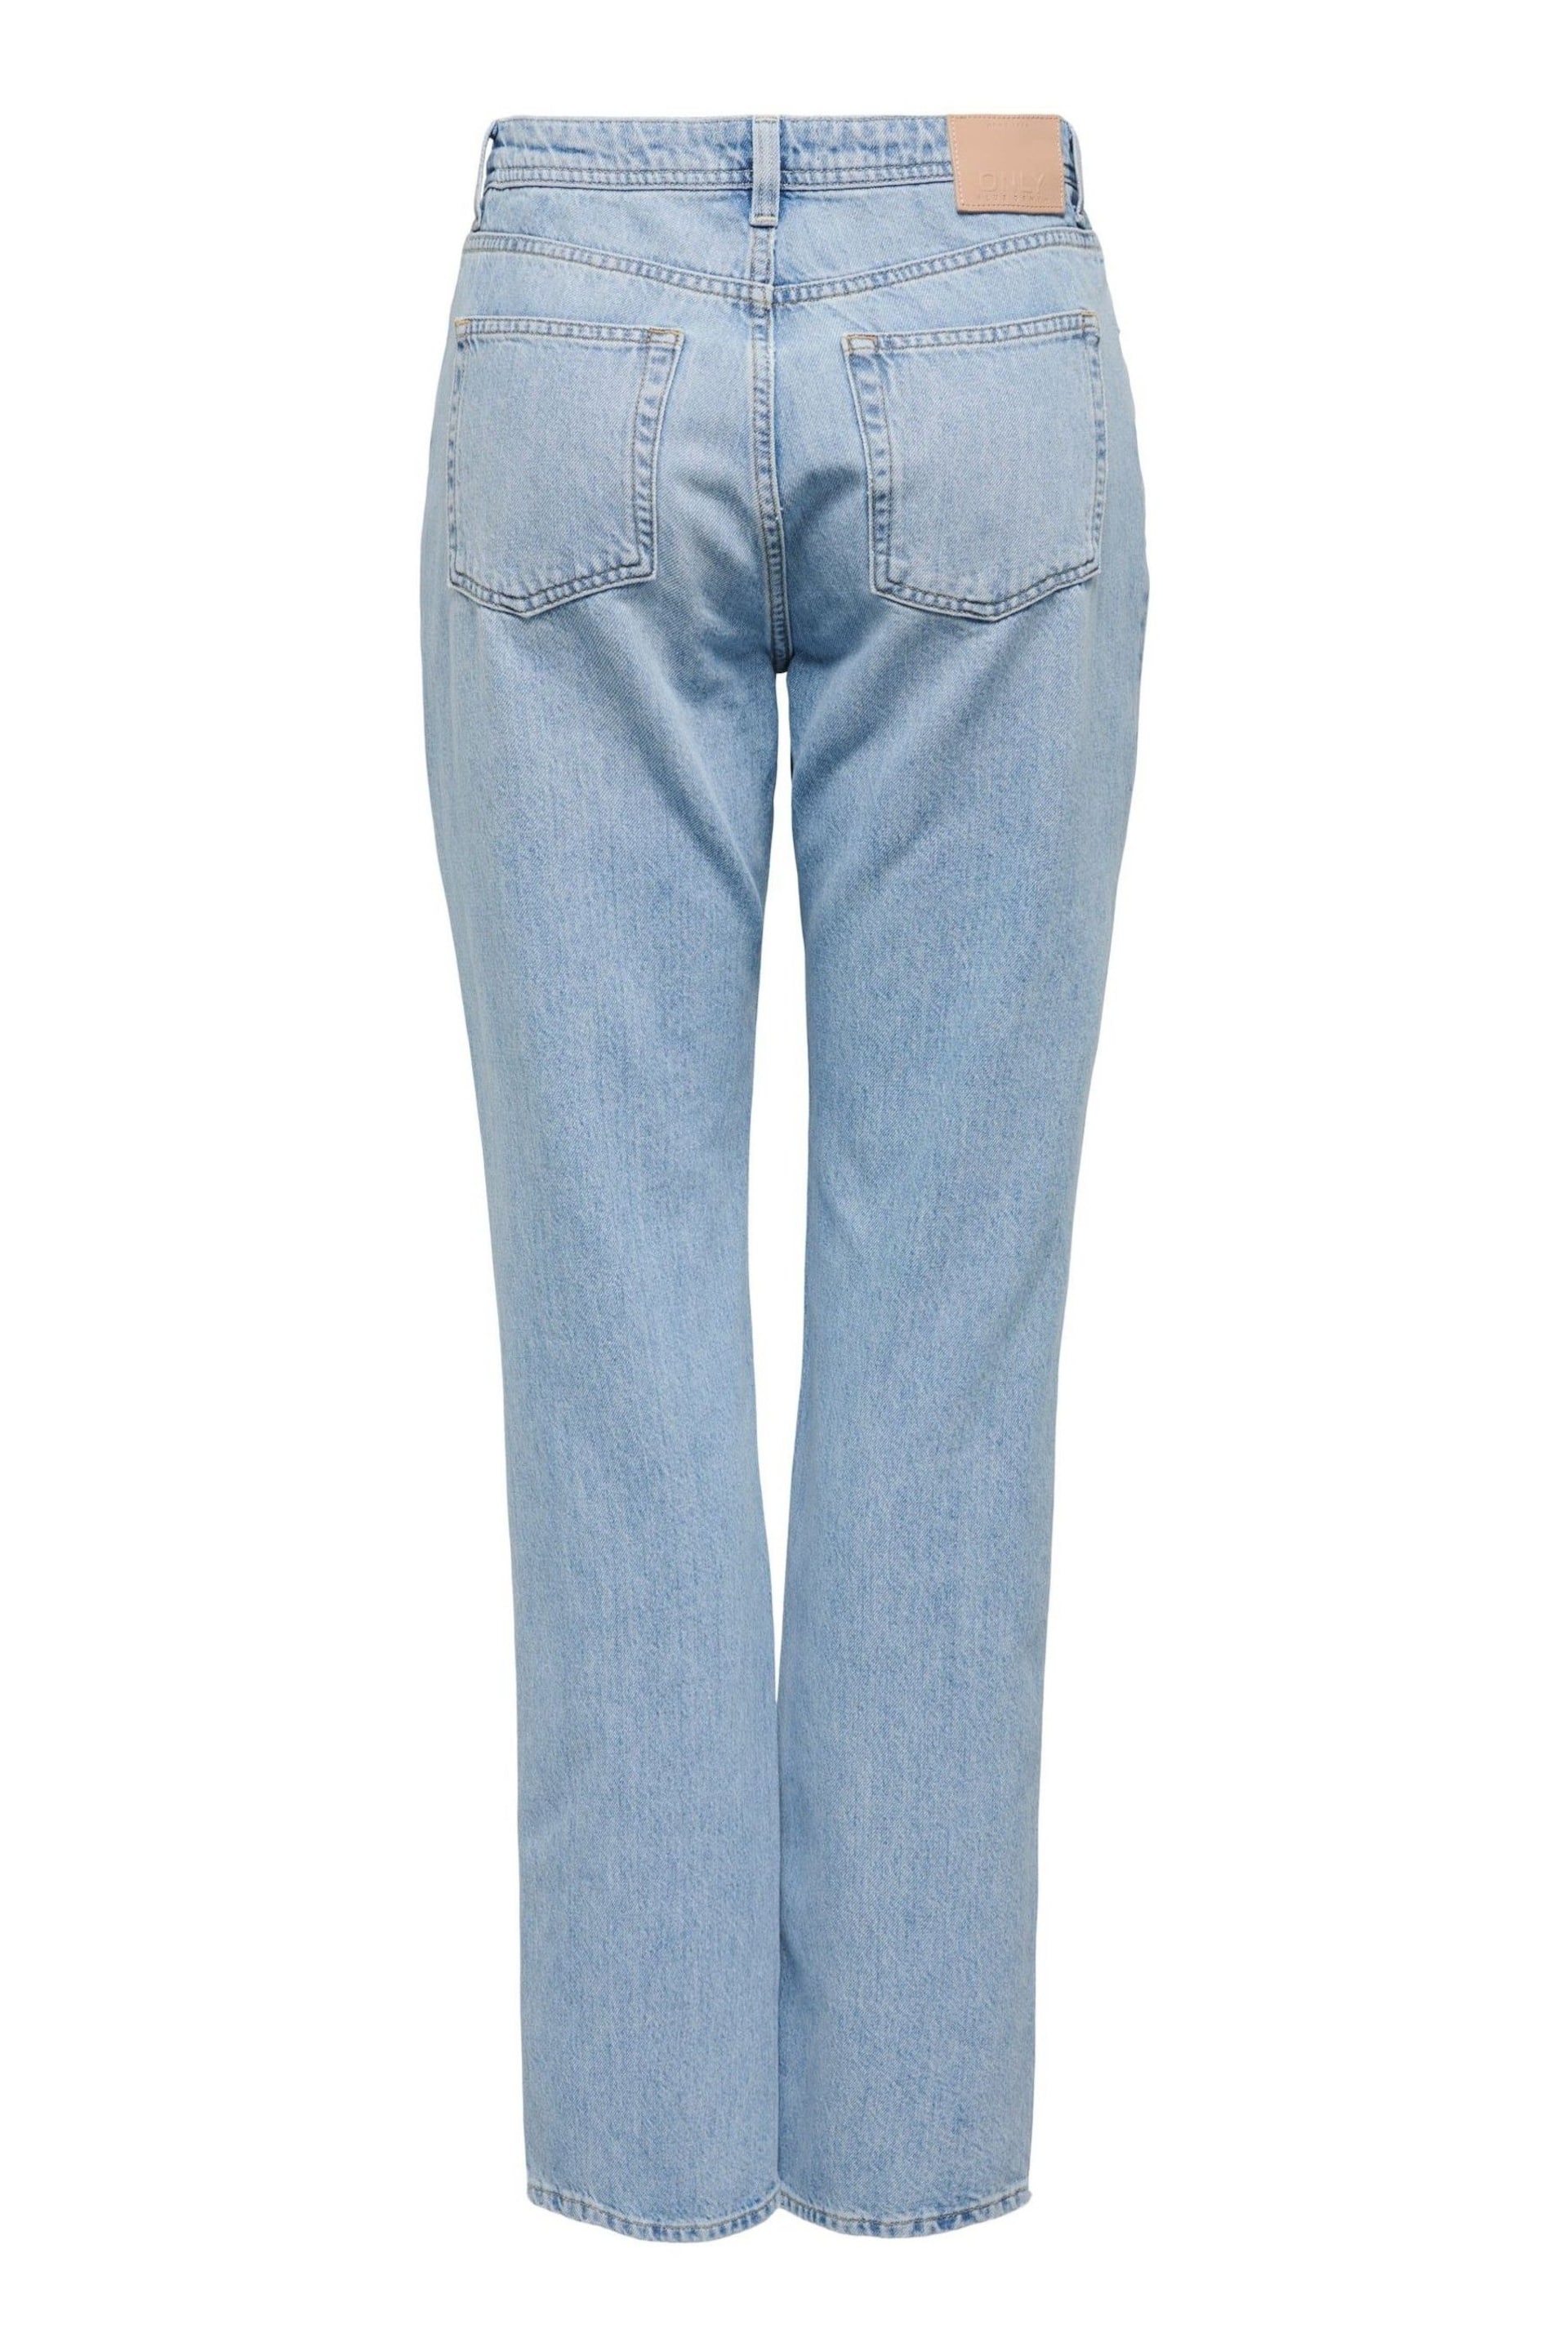 ONLY Blue High Waisted Straight Leg Jeans - Image 7 of 7